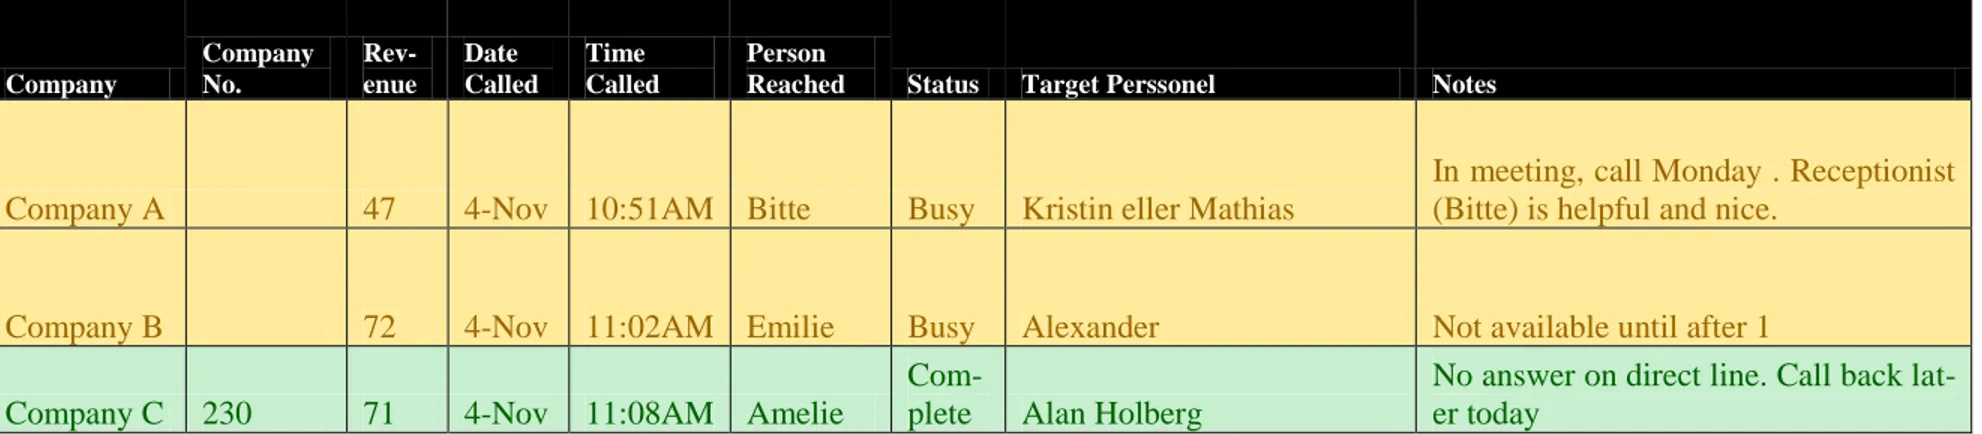 Figure 19  Company  Company No.   Rev-enue  Date  Called  Time  Called  Person 